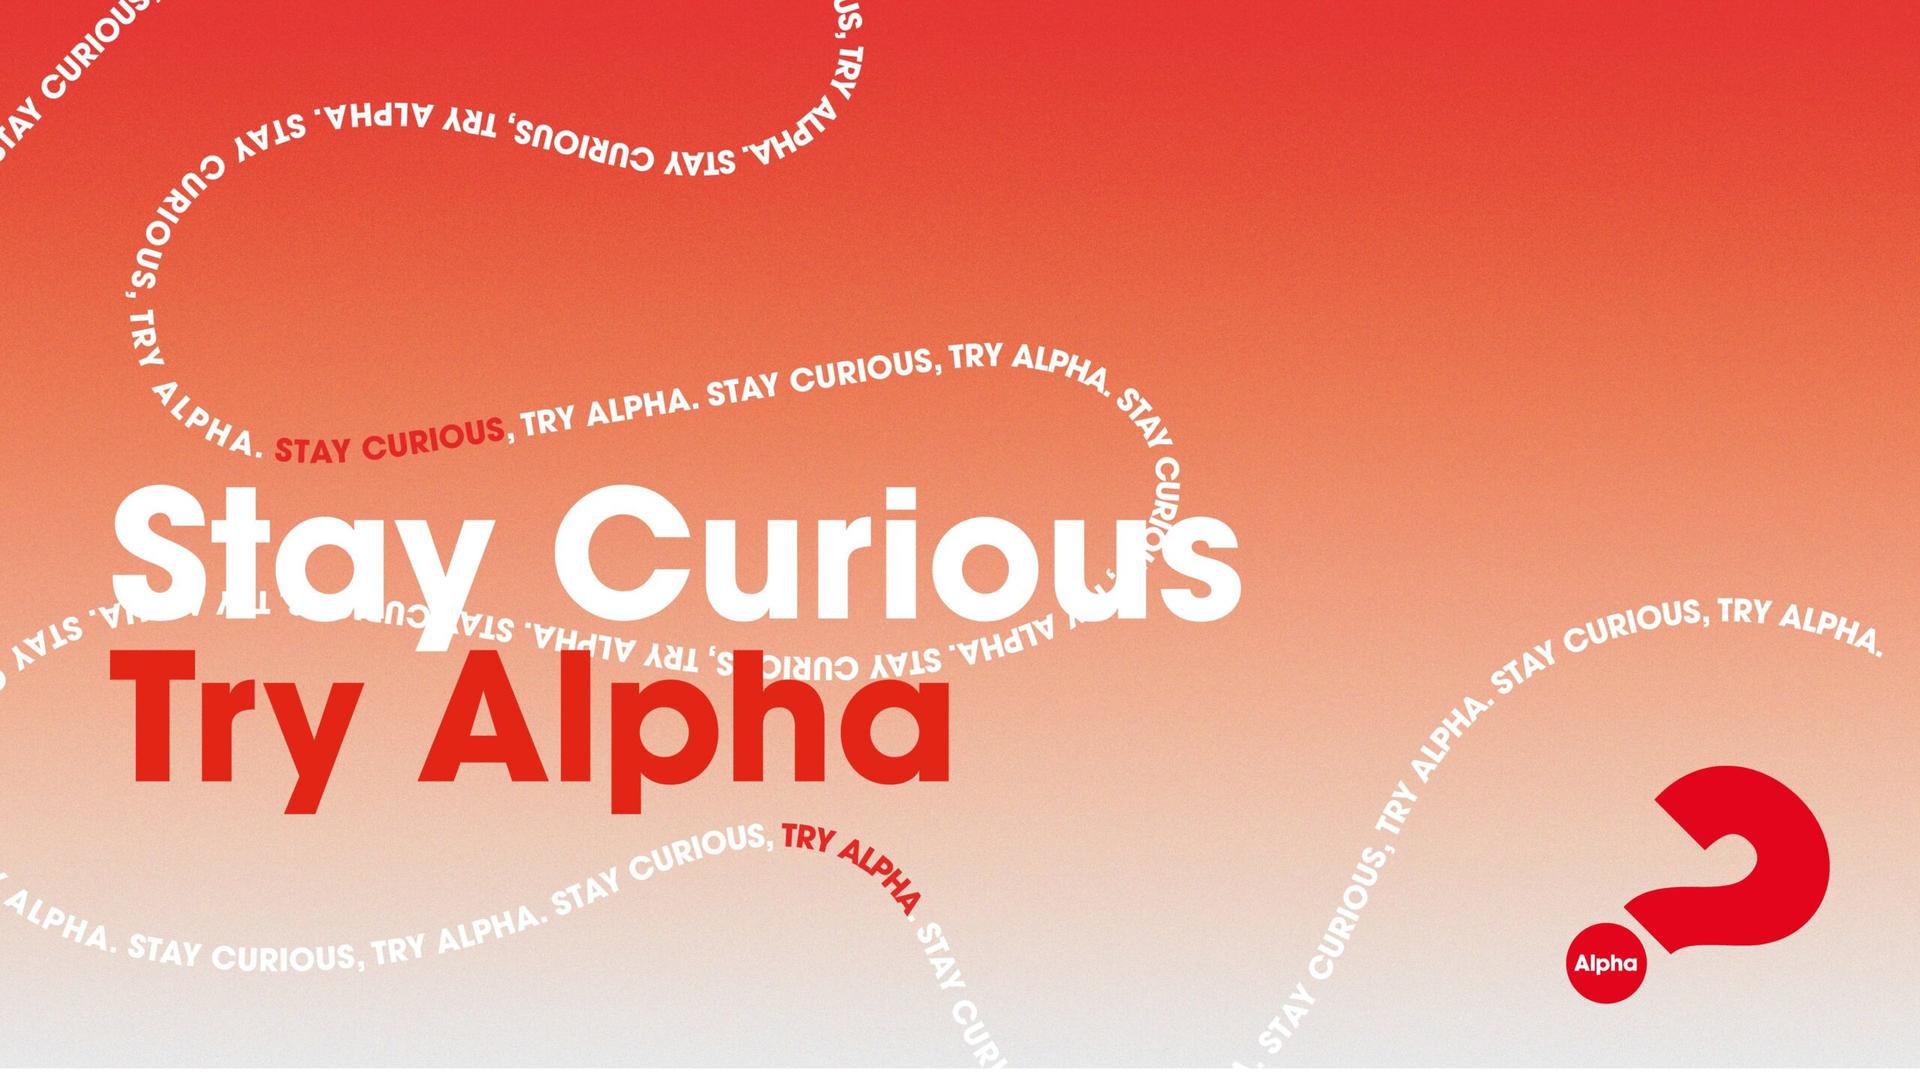 Stay curious, try Alpha